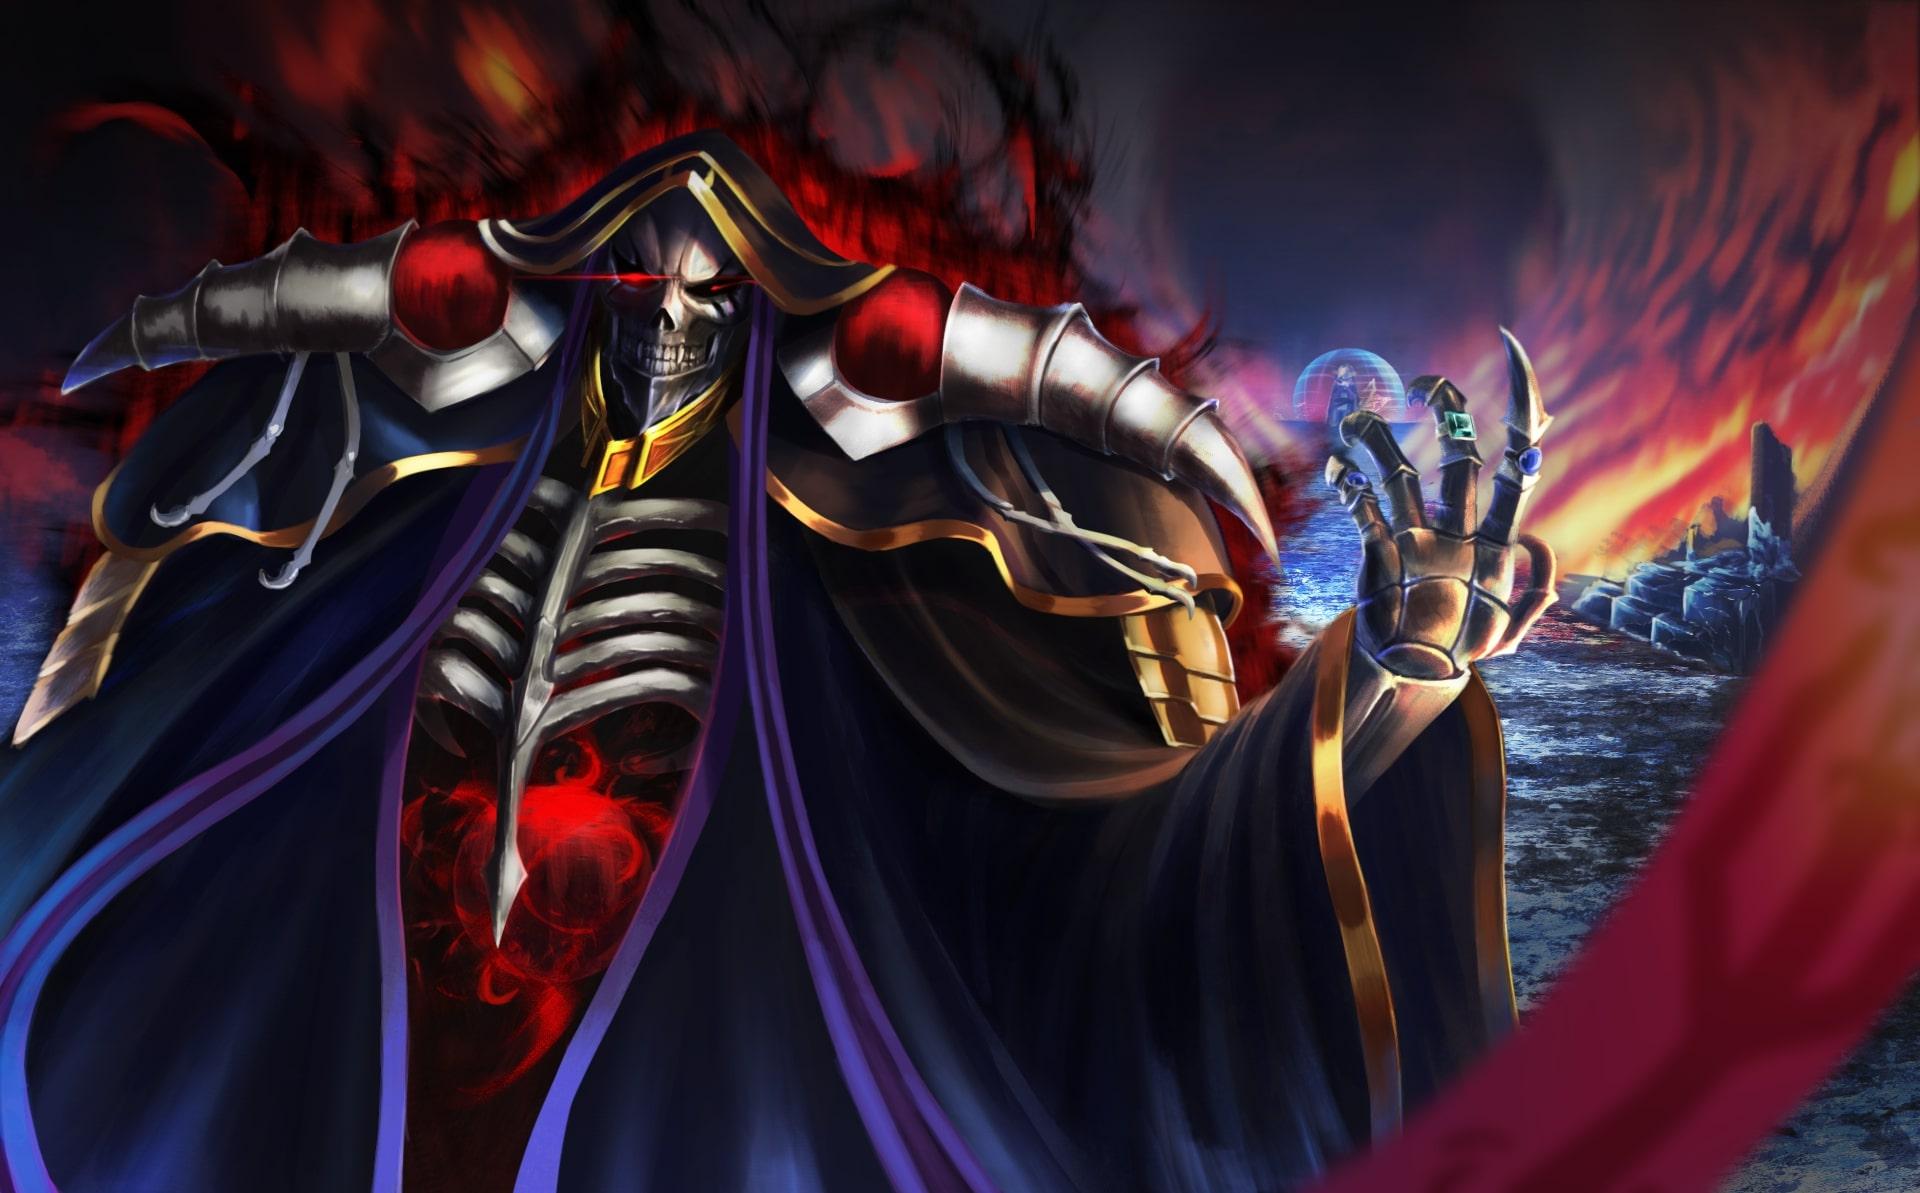 Wallpaper of Ainz Ooal Gown, Anime, Overlord background & HD image